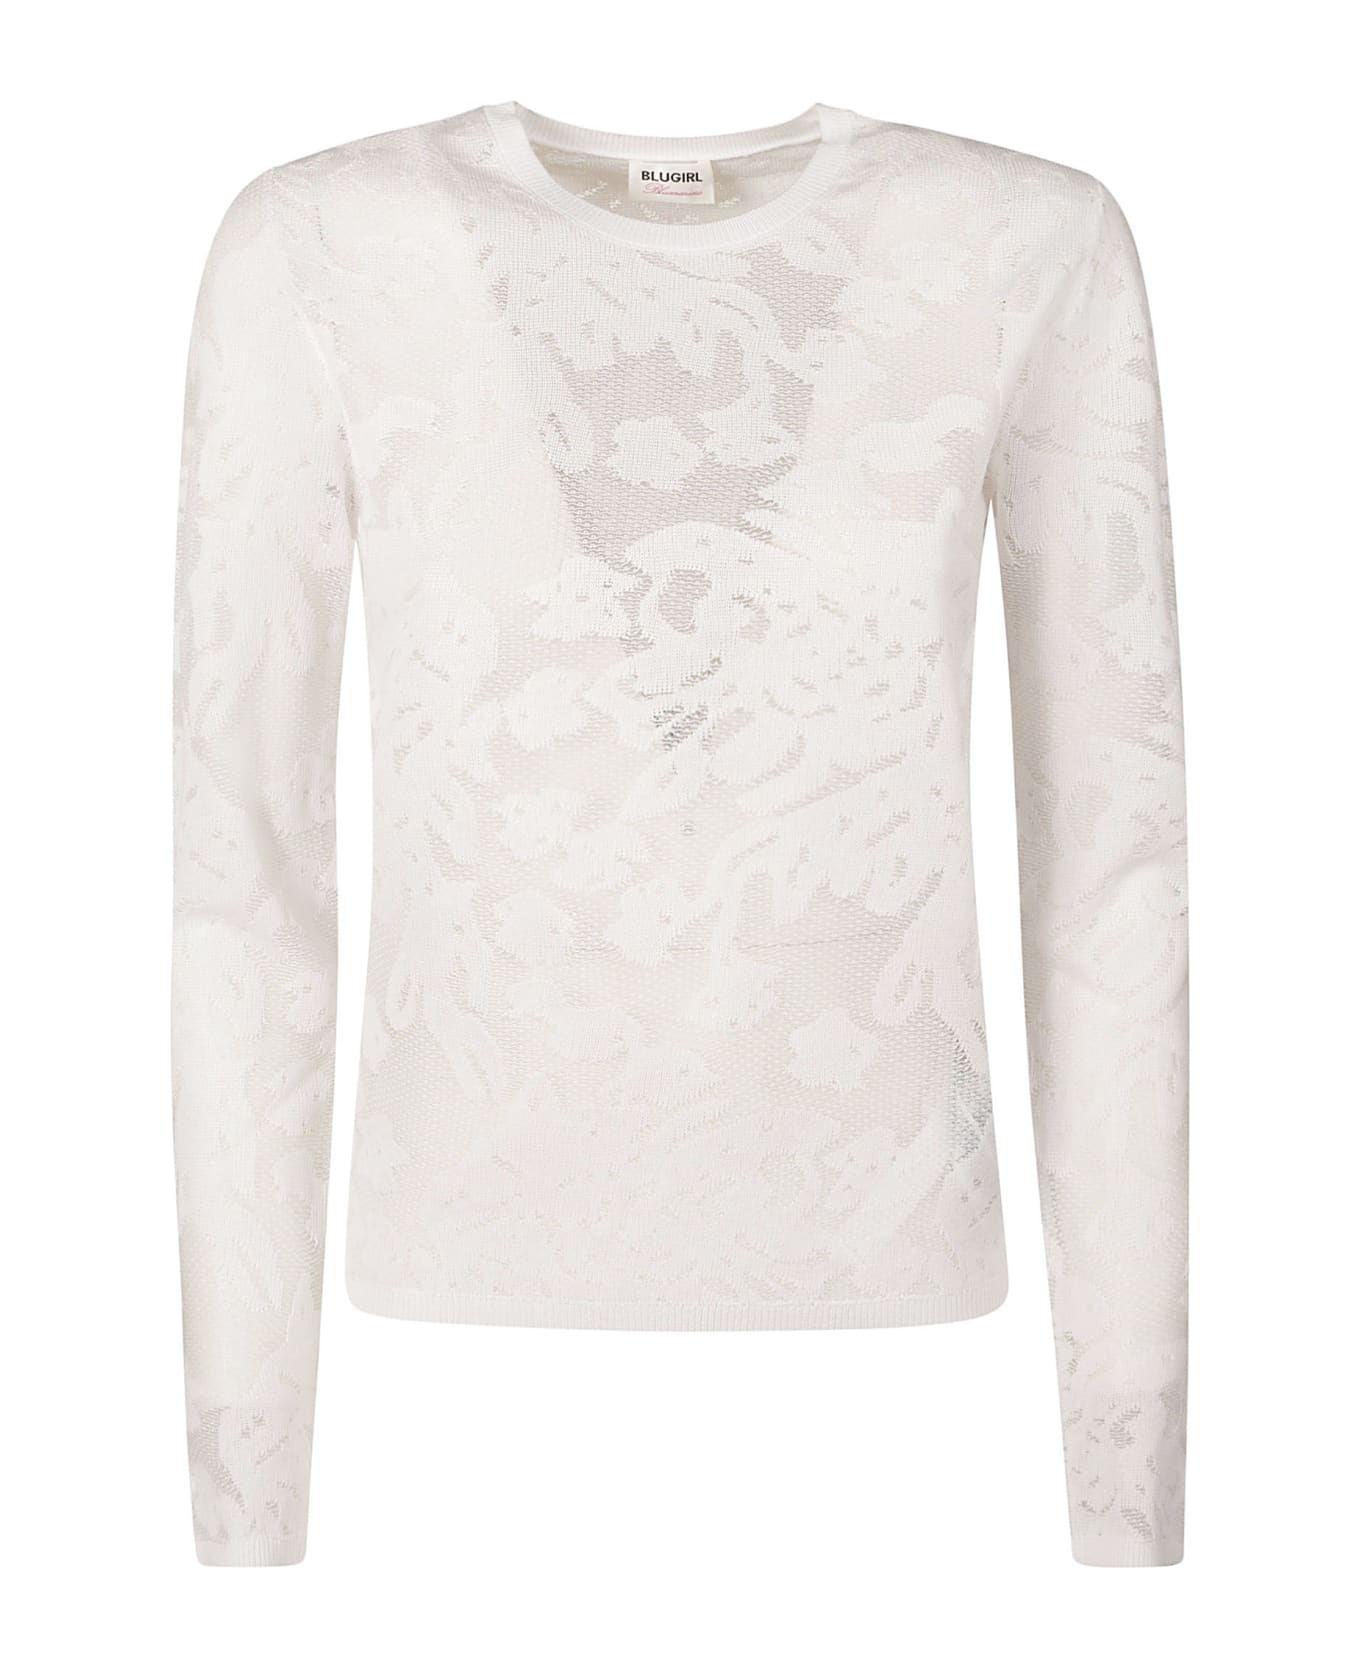 Blugirl Long-sleeved Floral Lace Top - Gesso